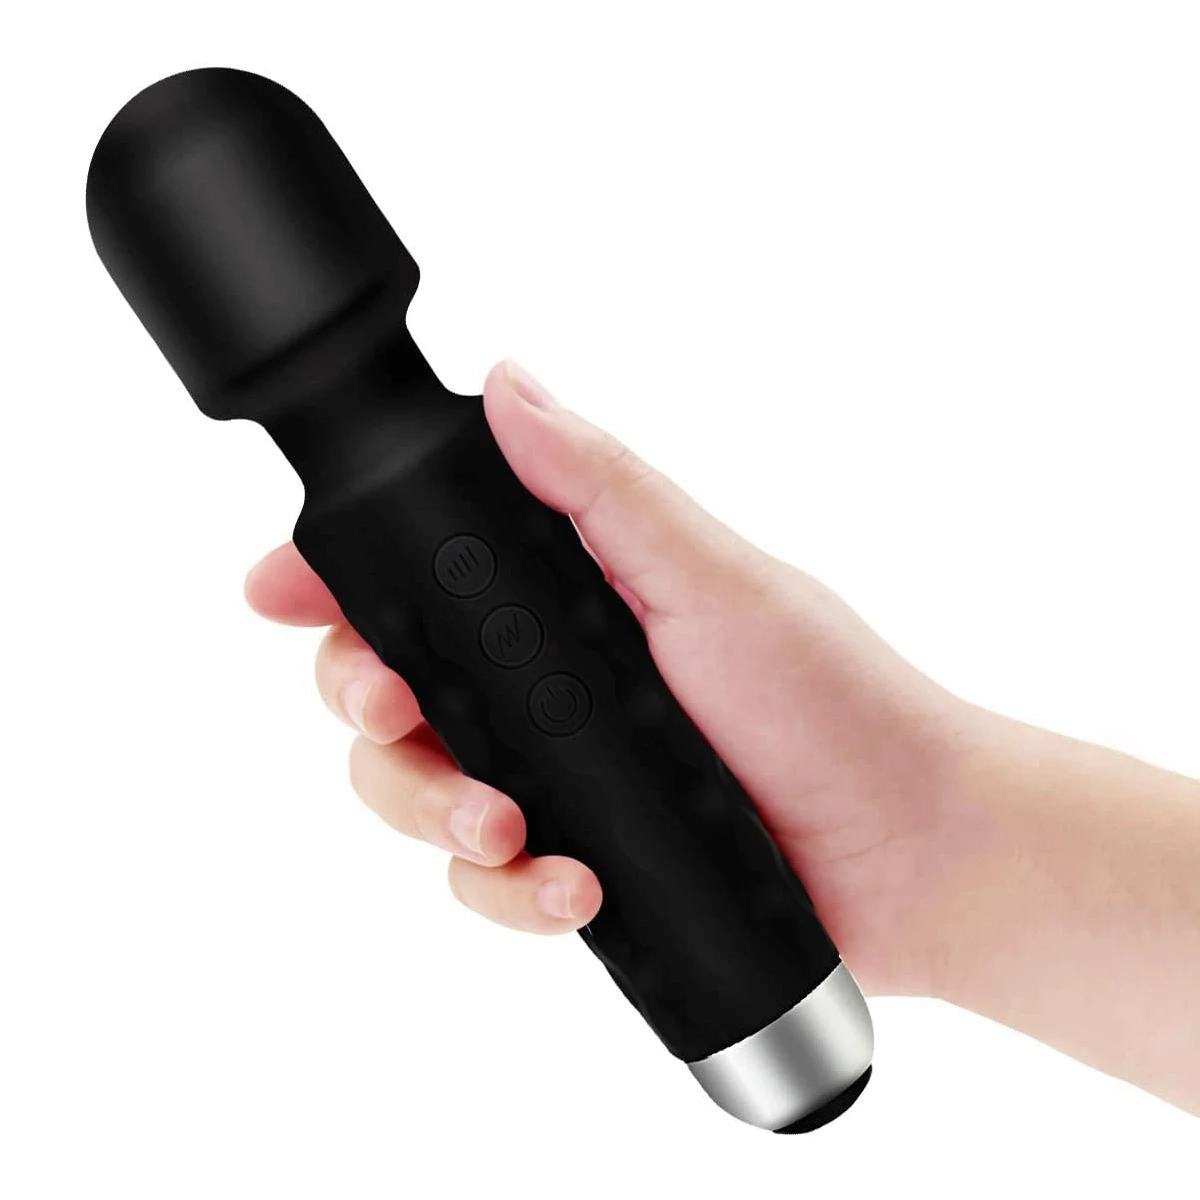 

Cordless Personal Wand vibrators Electric Massager 20 Powerful Vibrations, Rechargeable Handheld Back Wand Sex Toys For Woman